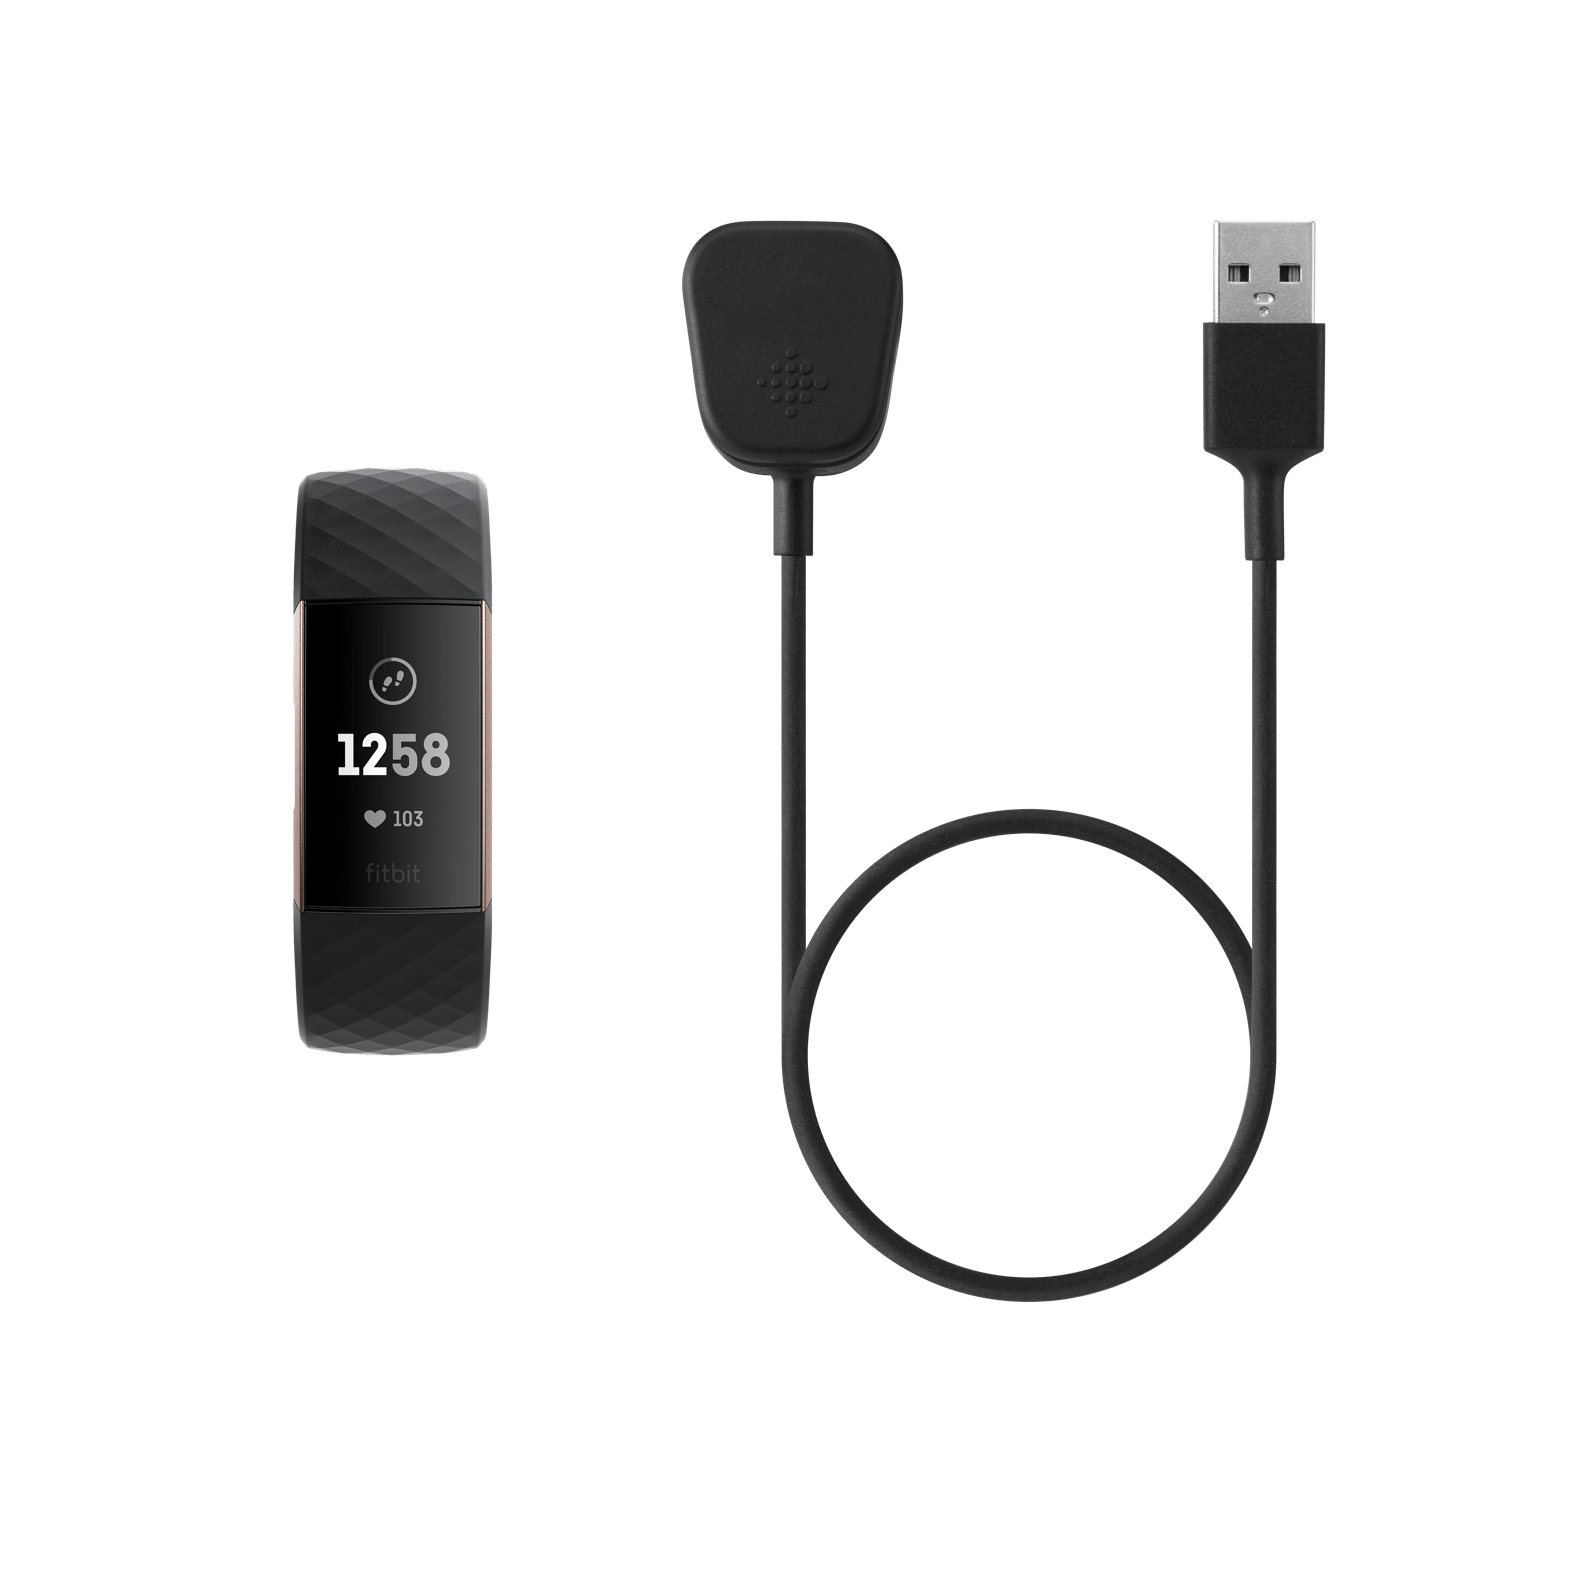 fitbit charge 3 usb charger